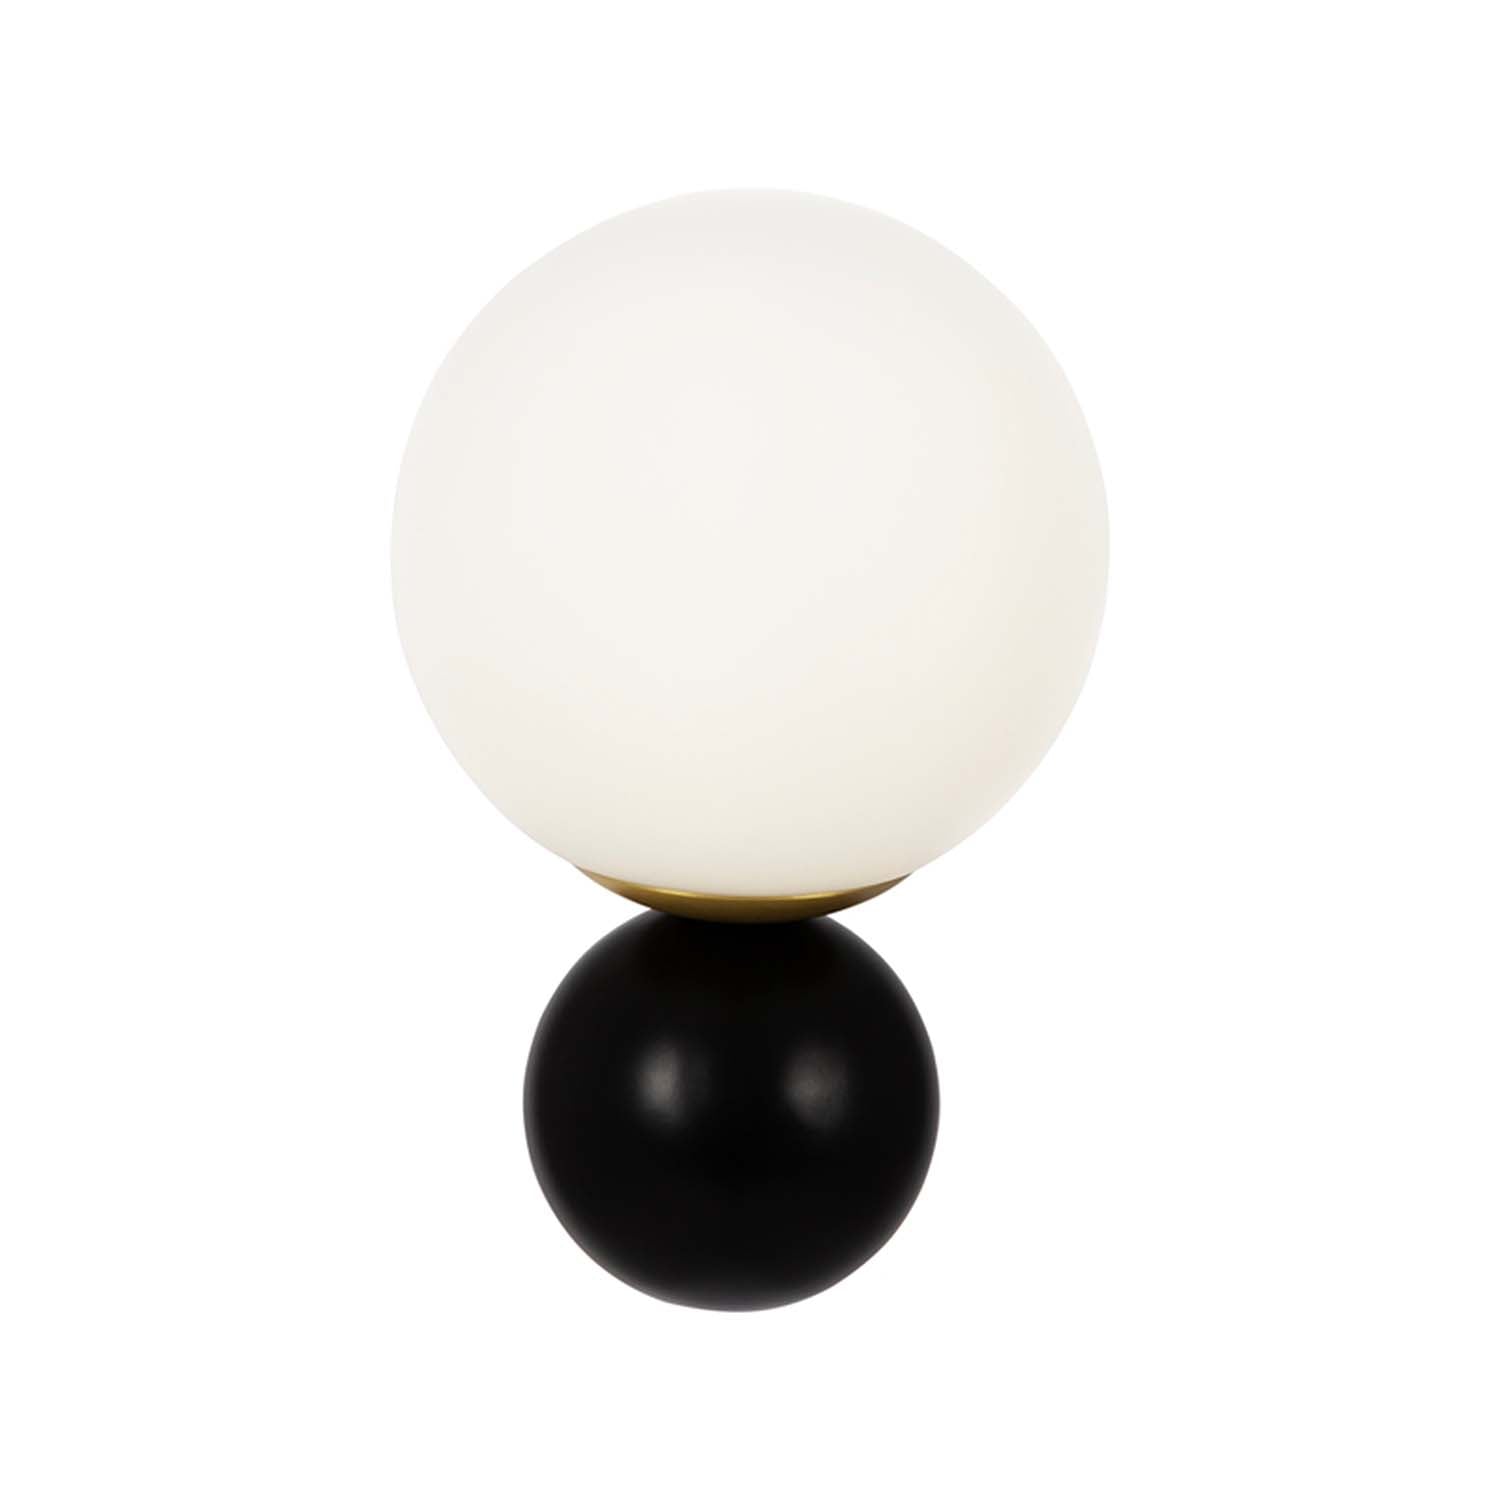 NOSTALGIA - Art deco wall light with glass balls, gold and black